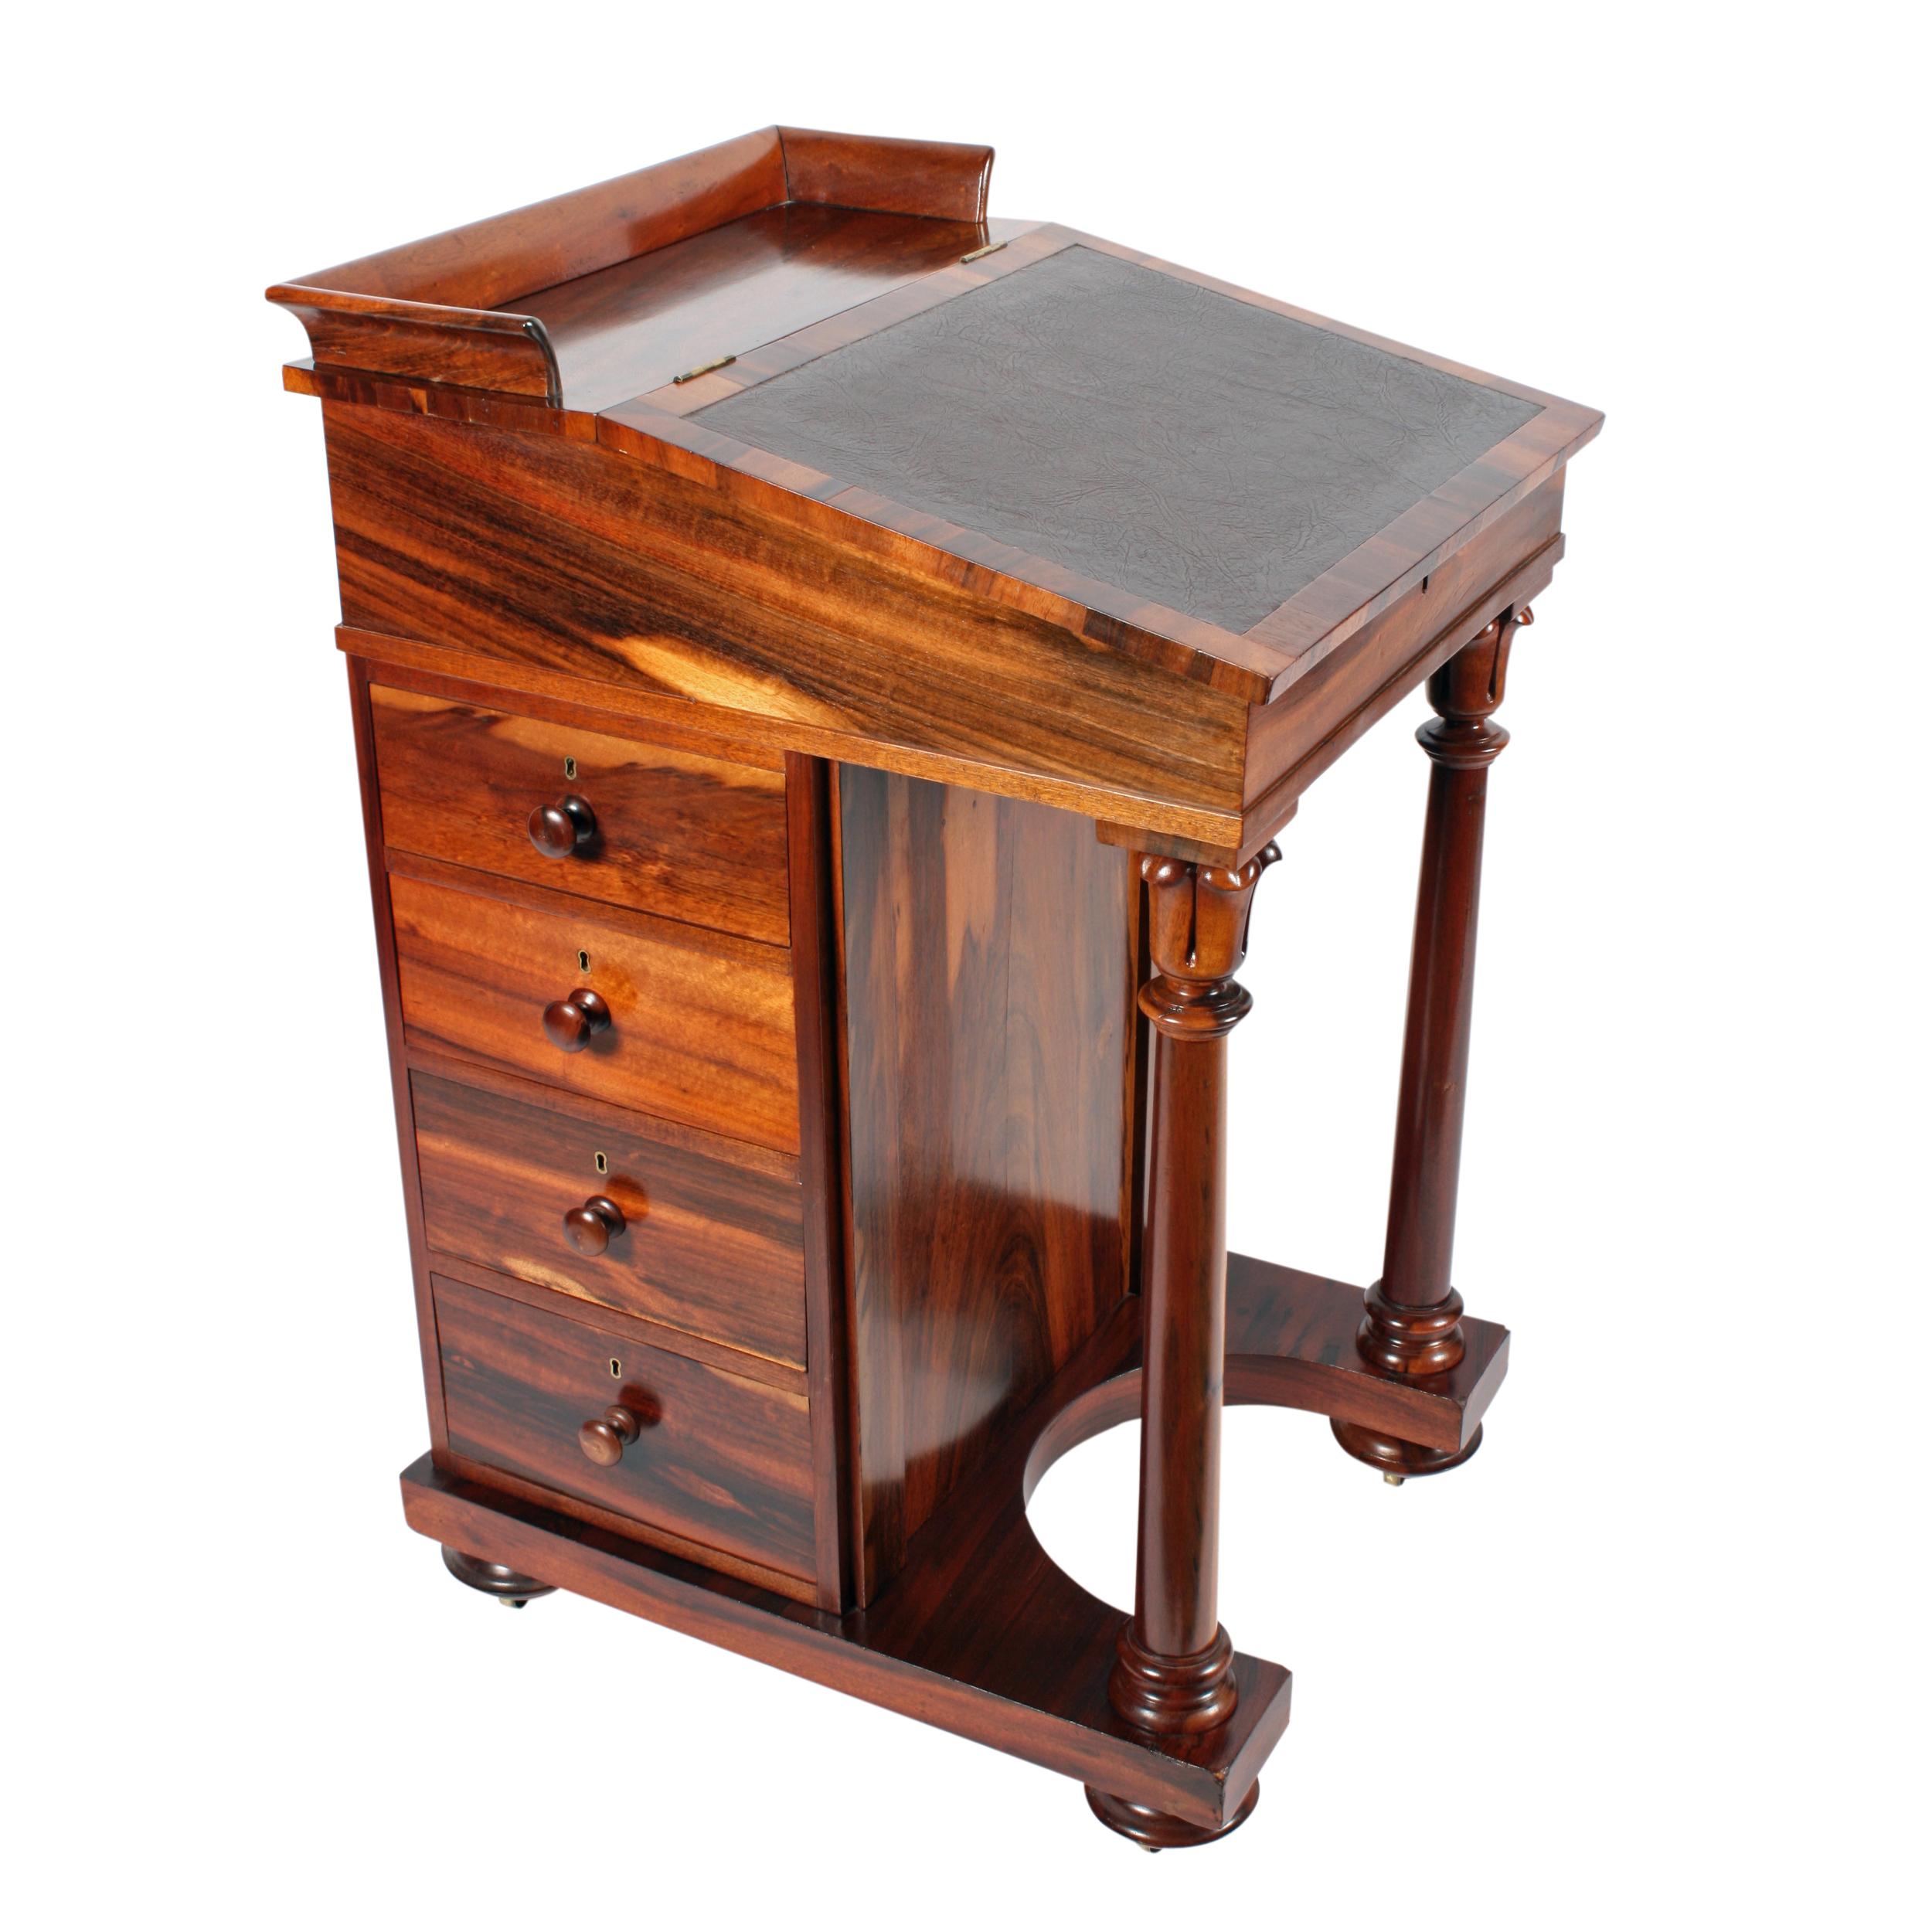 An early 19th century George IV zebra wood veneered mahogany lined Davenport desk.

The desk has four drawers with knob handles to the right hand side with four dummy drawers to the left.

Above the drawers is a small pen and ink drawer which